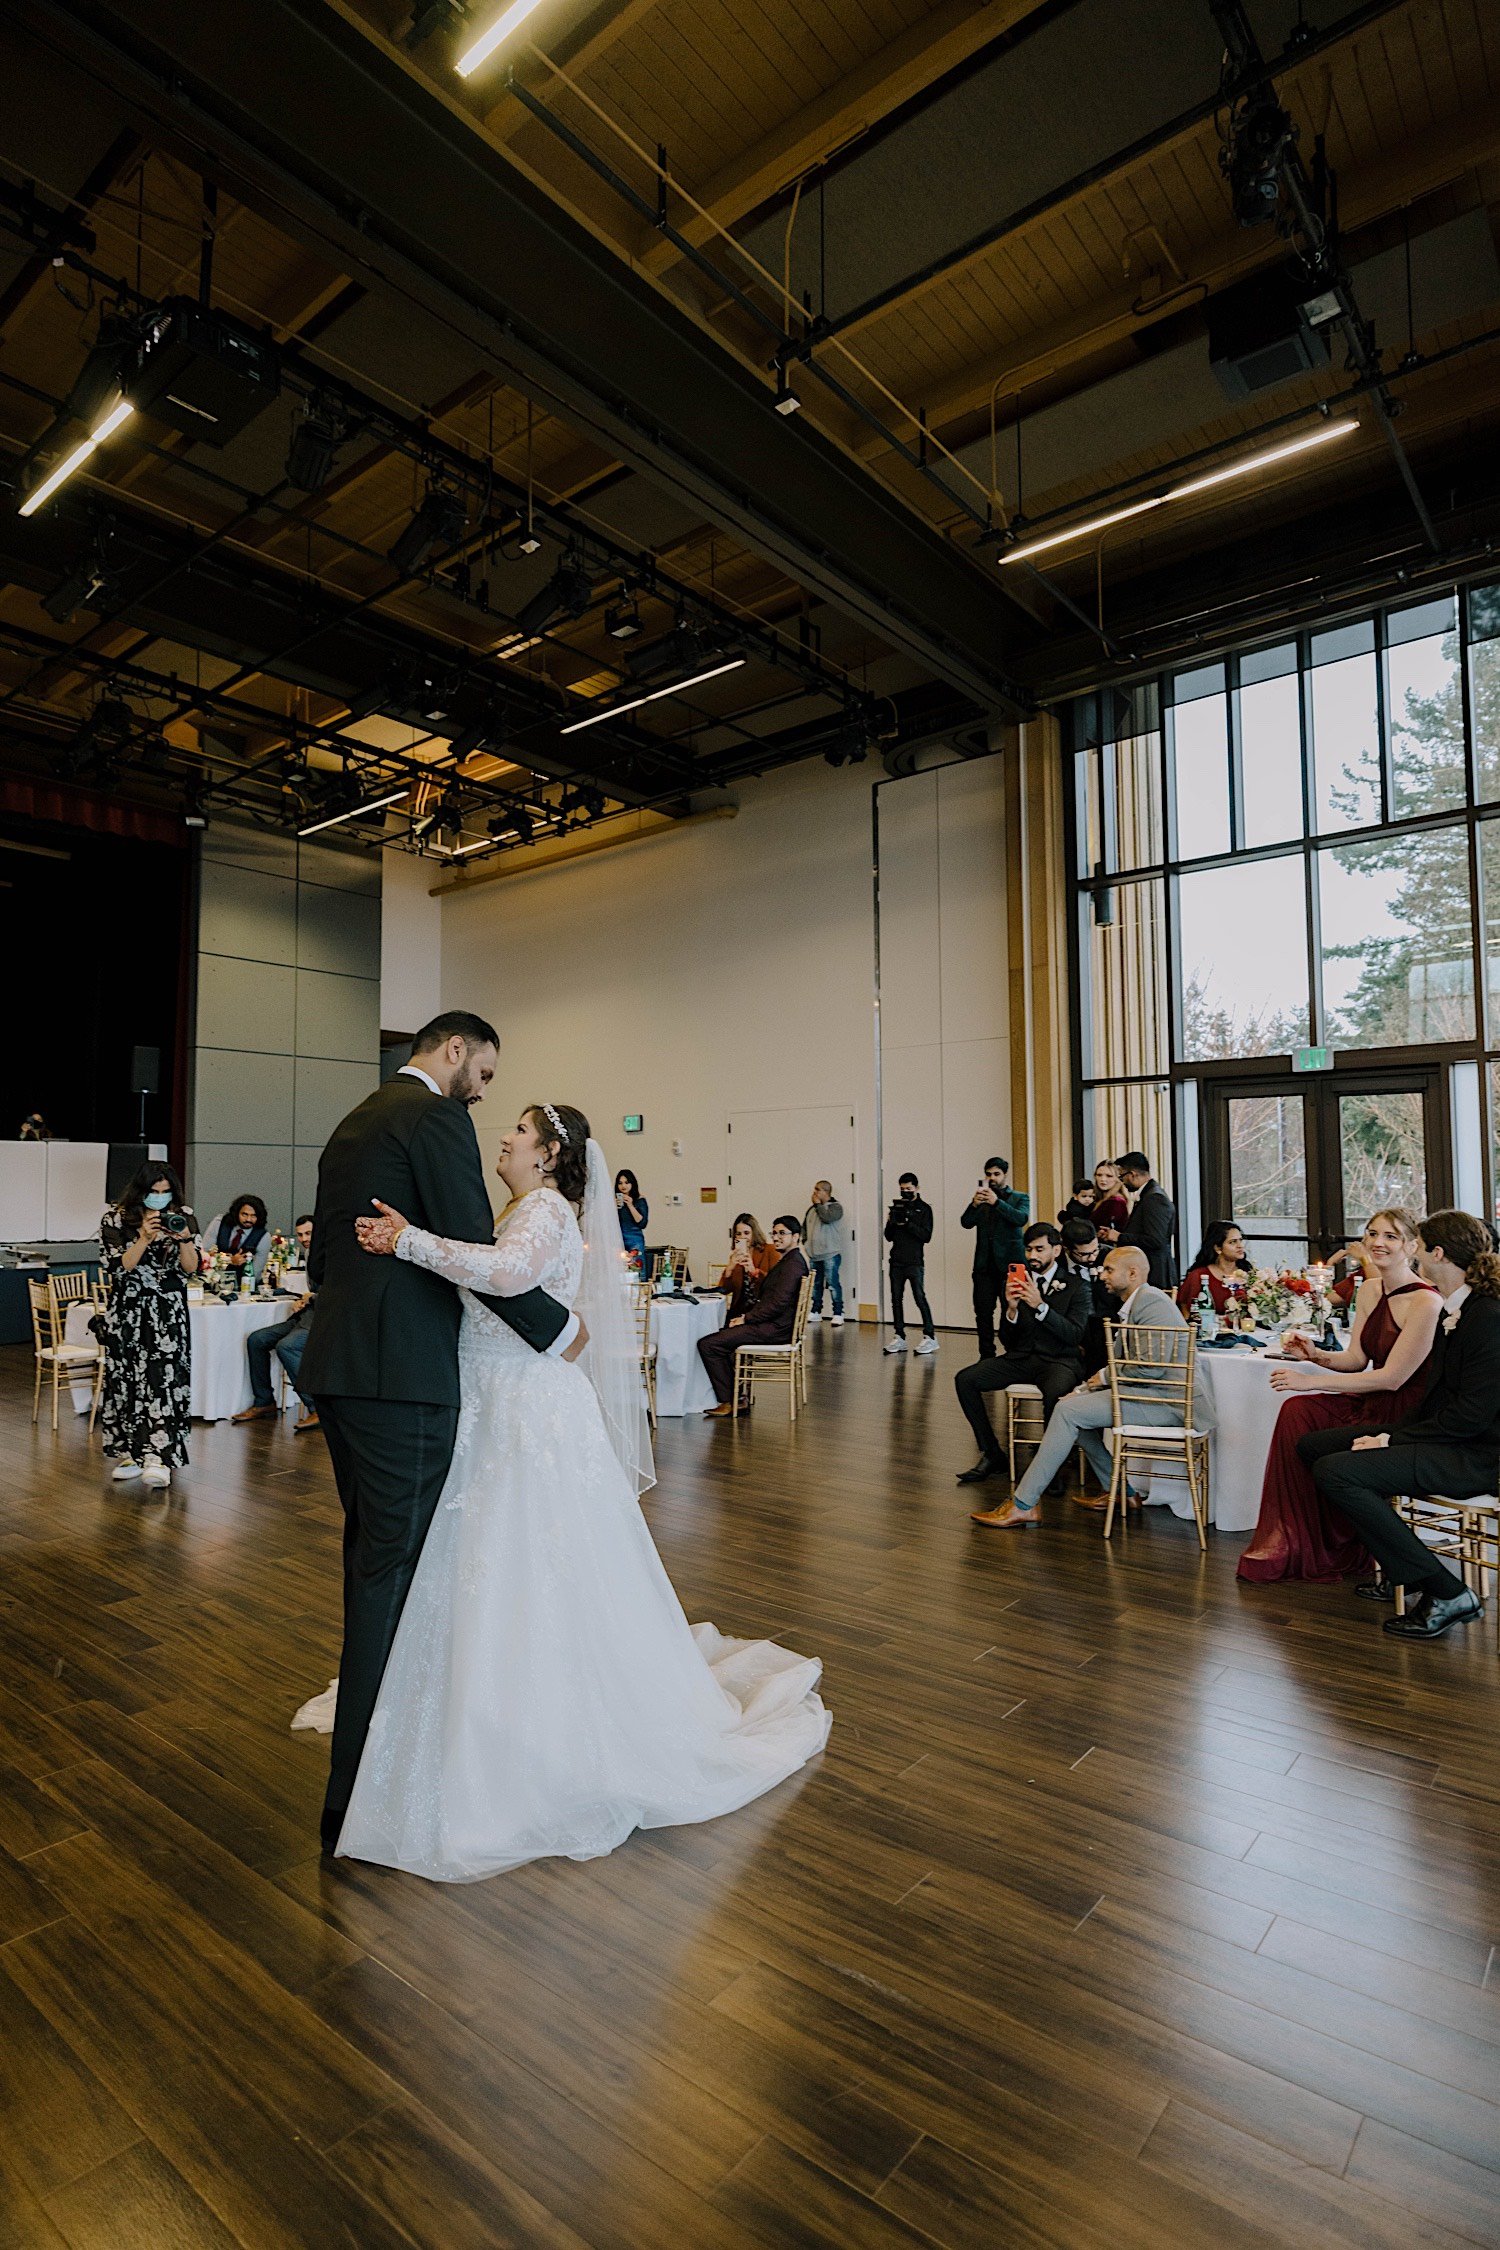 Bride and groom share their first dance together as their wedding guests watch inside the Rosehill Community Center